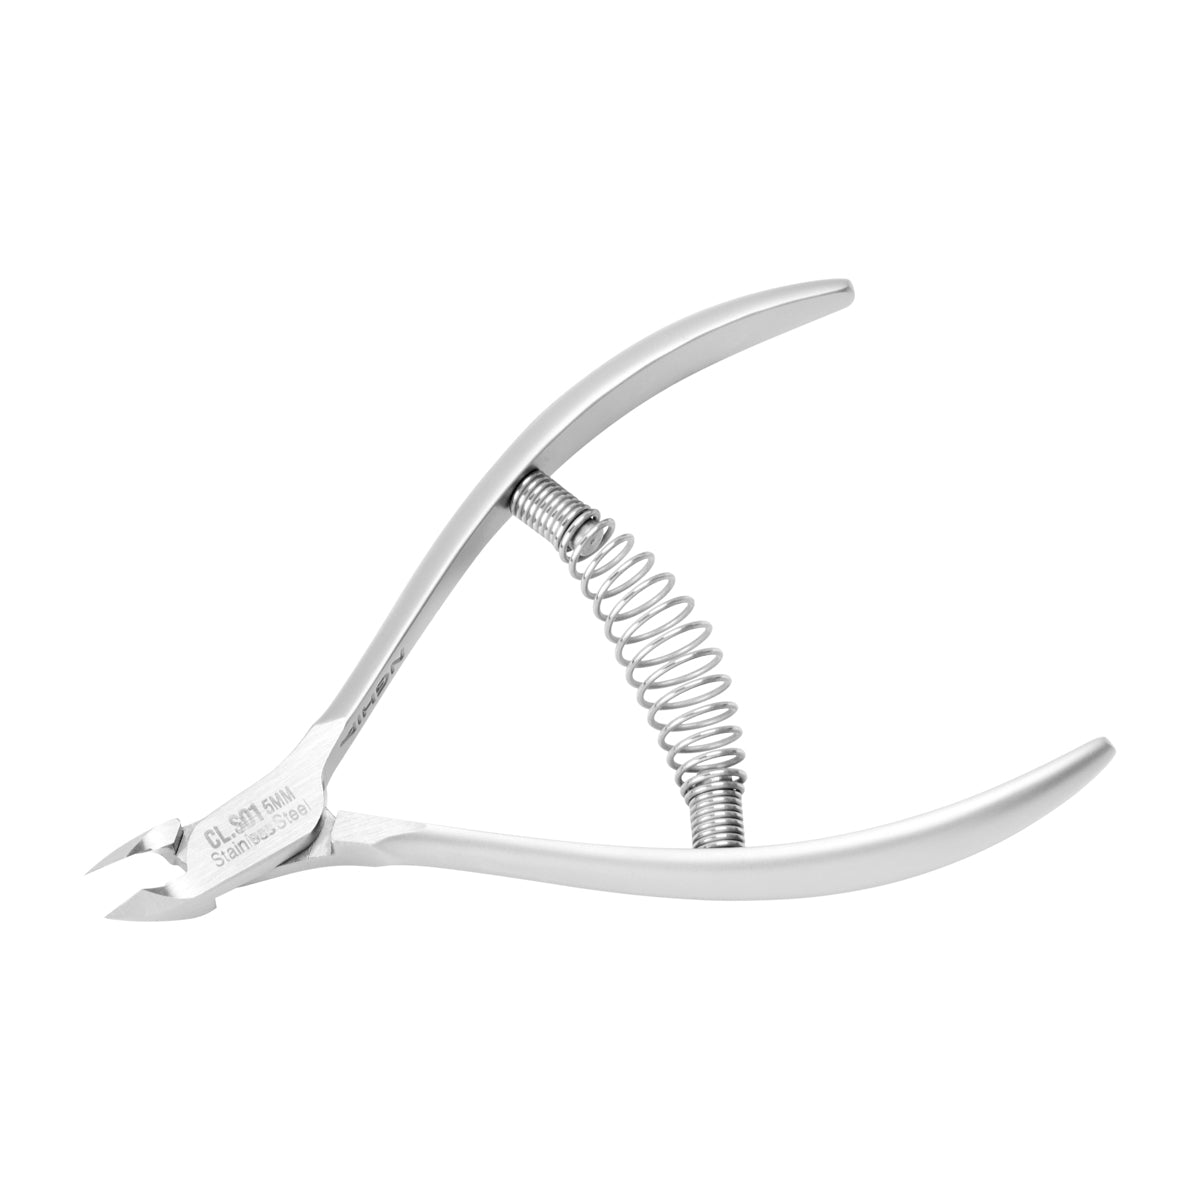 Nghia Export Cuticle Forceps CL.S01 12 (5MM)